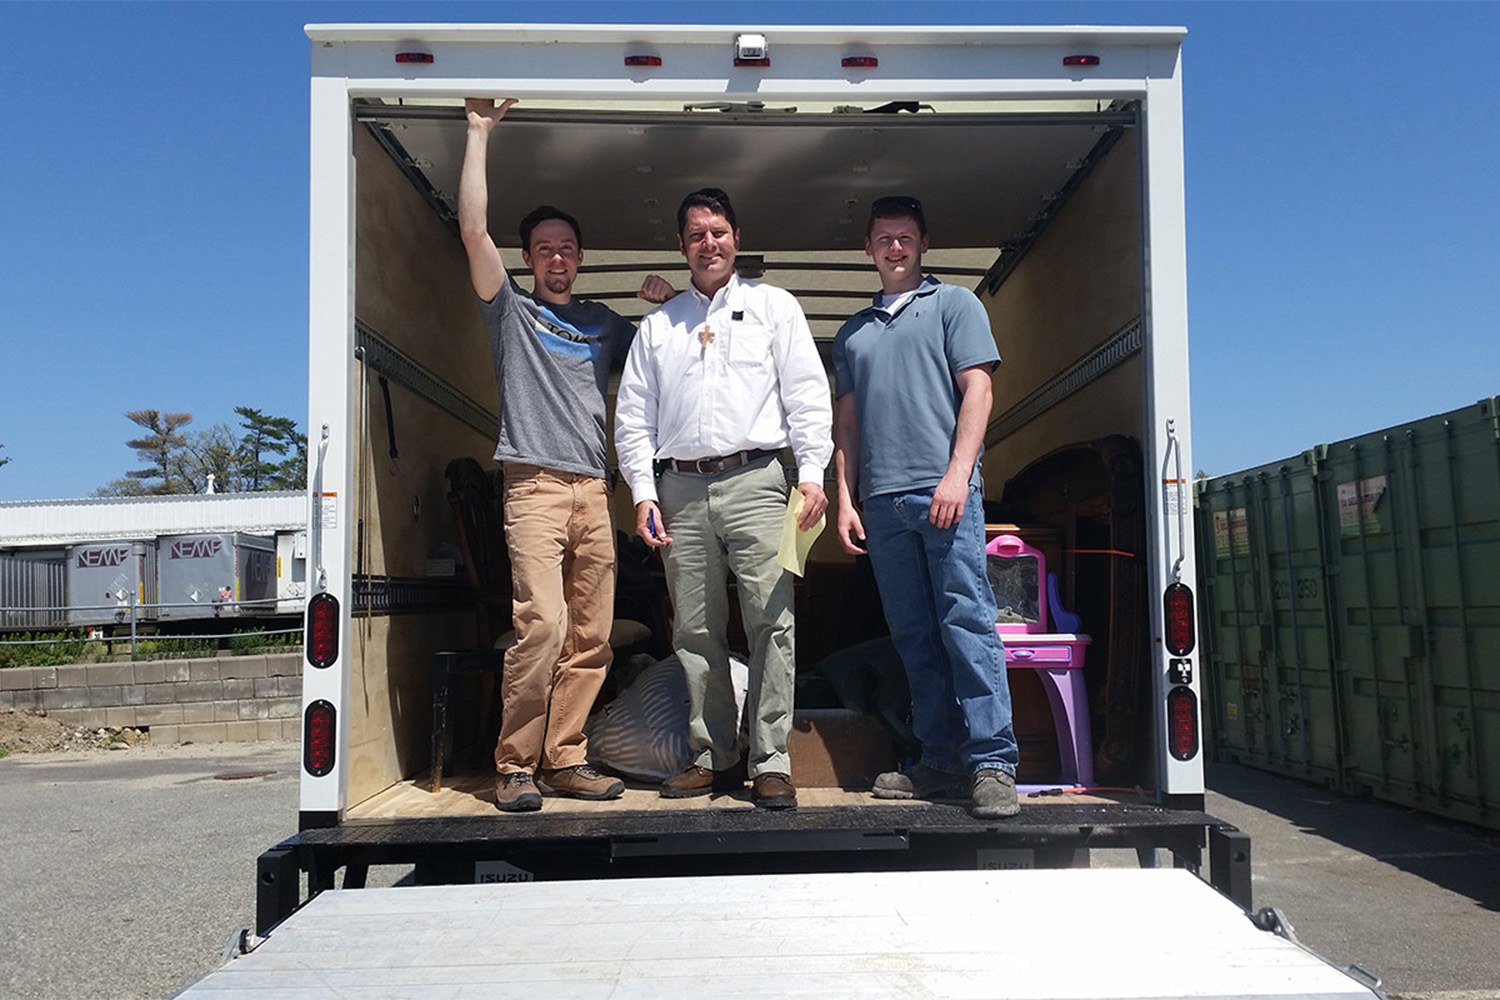 L to R: Ryan, VJ, + Caleb standing in the entrance of a truck 